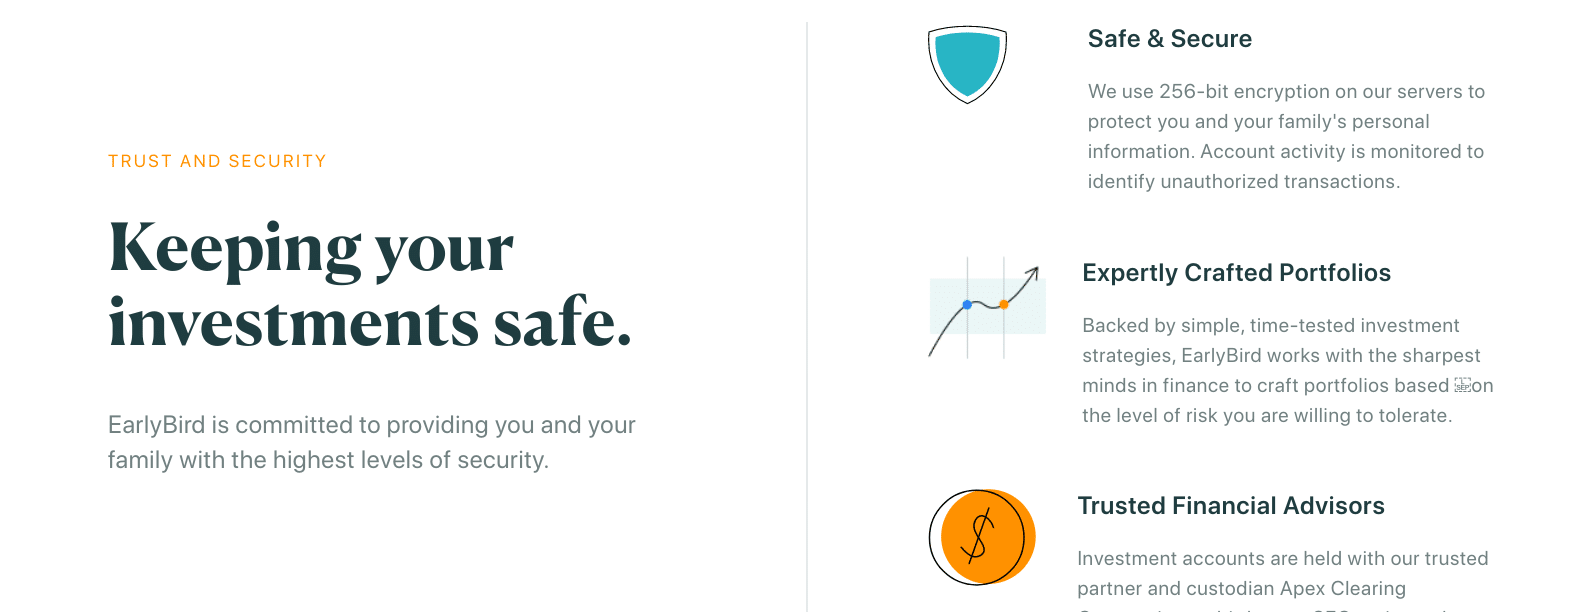 Early Bird Review: Security